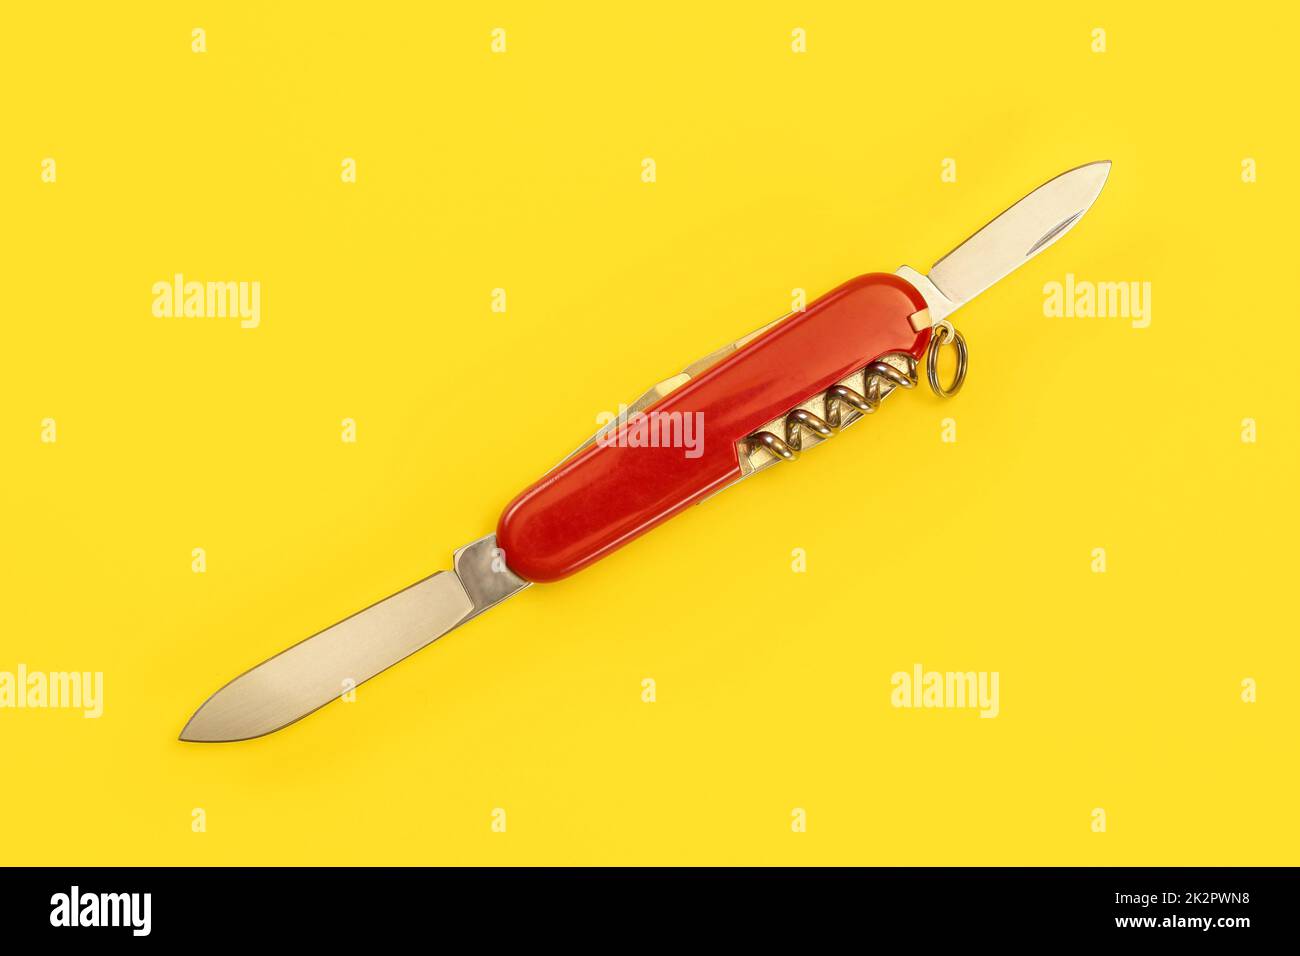 Tabletop view, red pocket knife, with both blades opened, laying on yellow board. Stock Photo